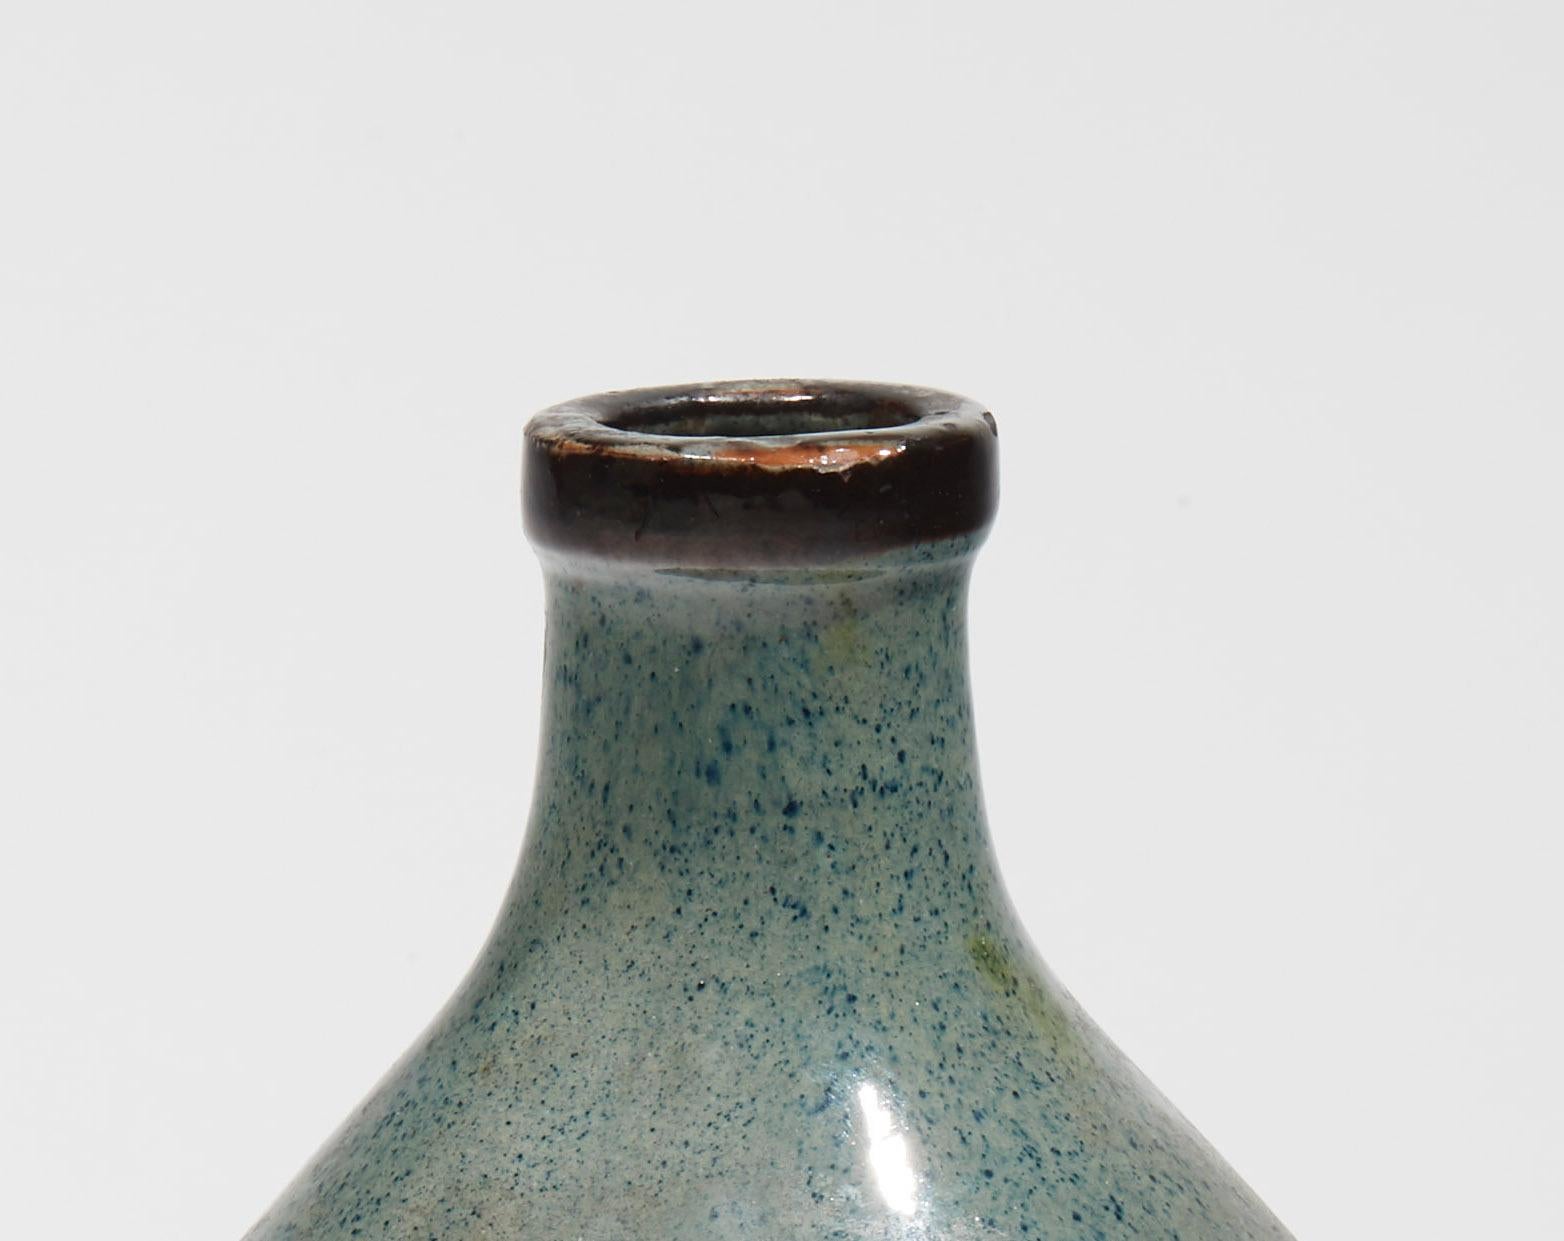 Ovoid earthenware vase with slightly protruding annular neck, modernist decoration in enamel with black and blue lines interrupted by blue squares on the belly, granite blue ground. Signed 